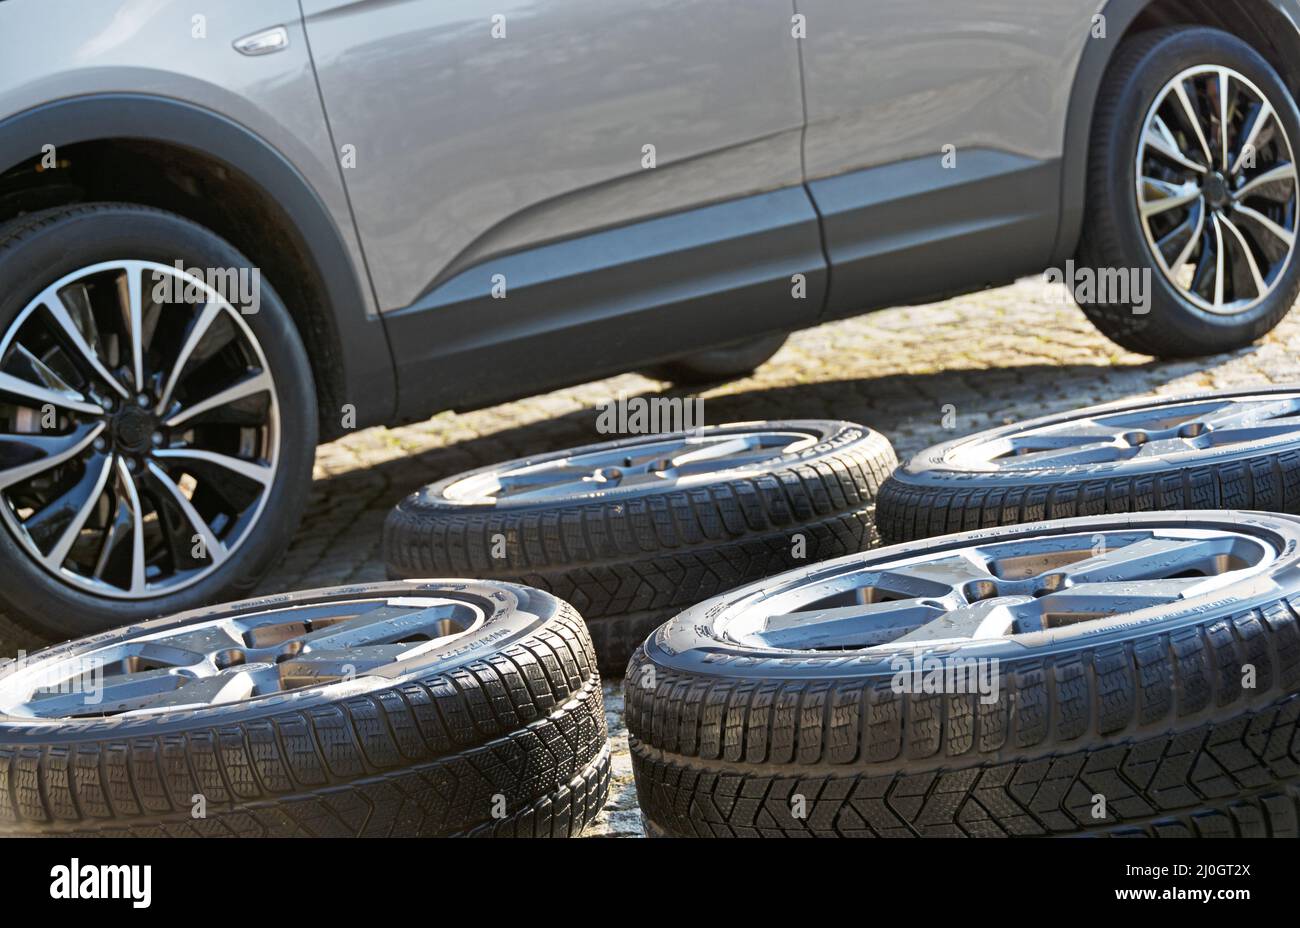 Washed winter wheels in front of modern car with summer wheels Stock Photo